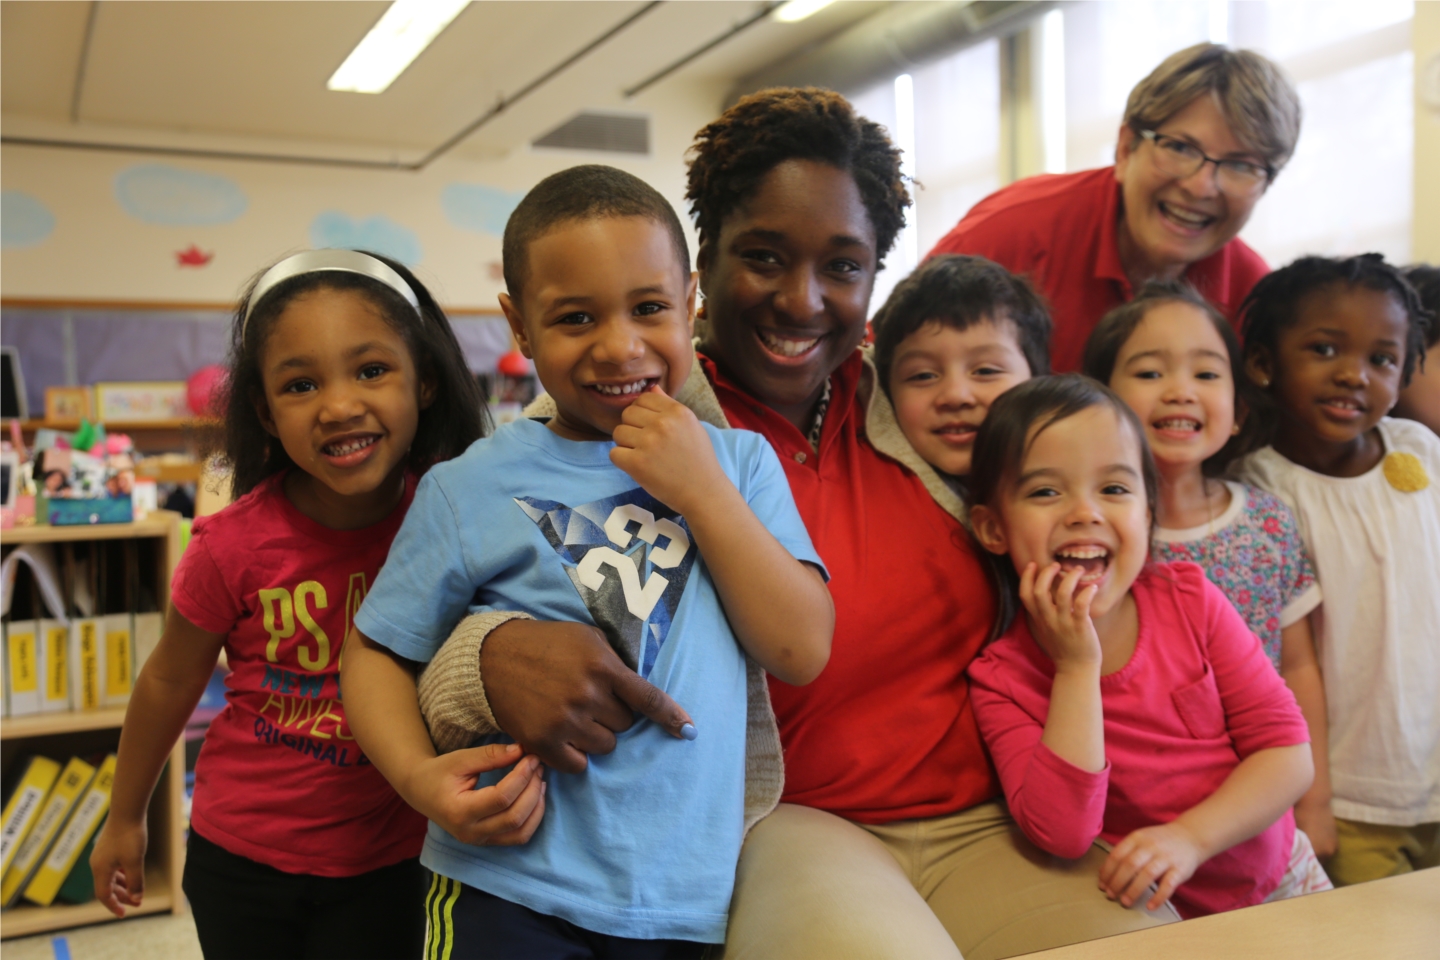 Catholic Charities child development centers are nationally accredited with a holistic approach, including focus on dual language learning, physical, social-emotional, and cognitive development.